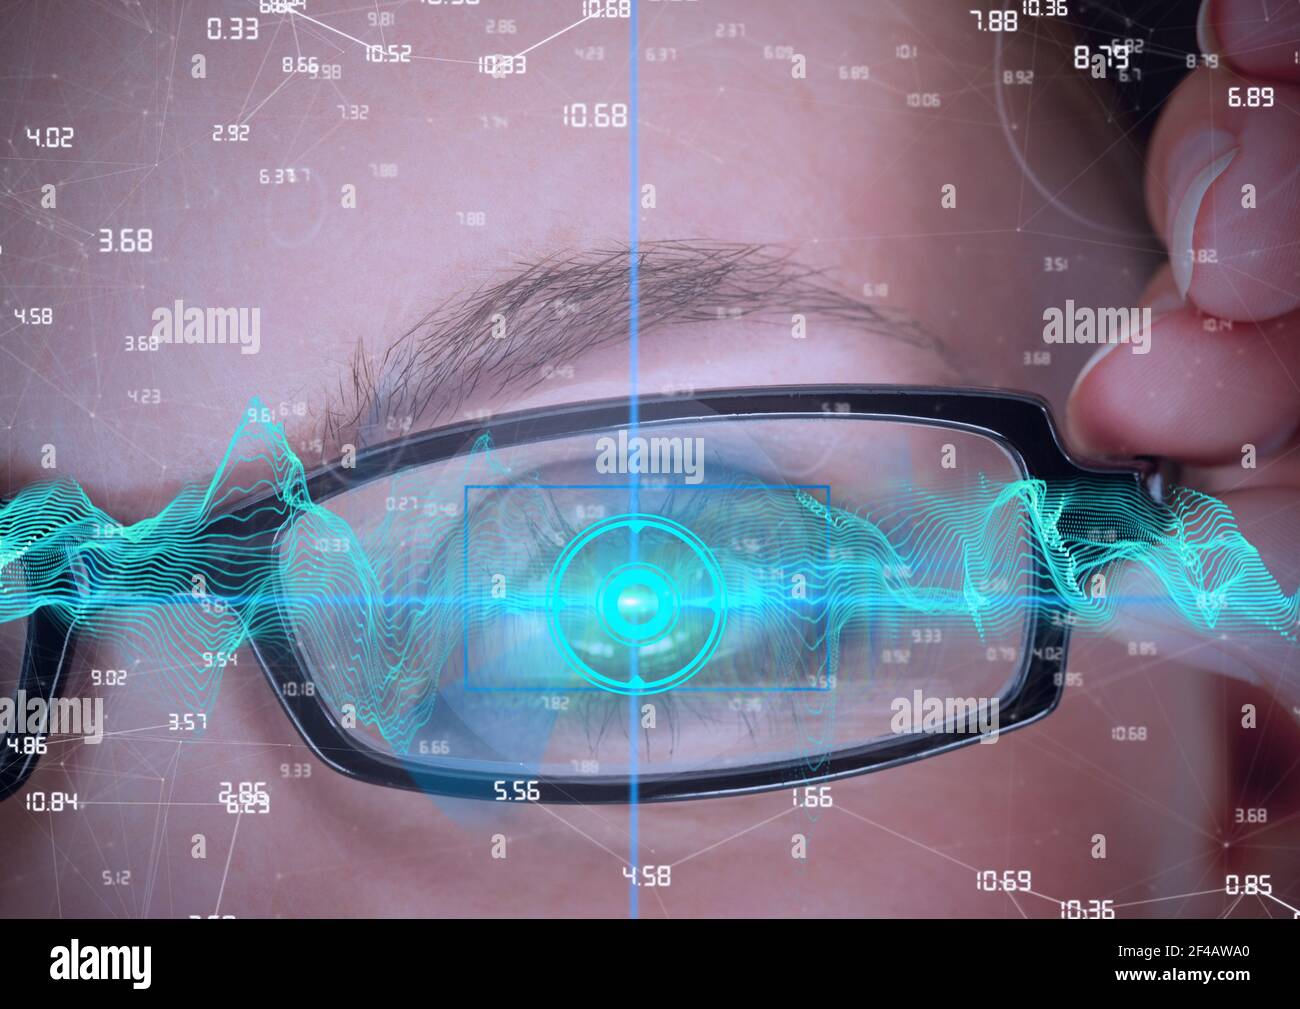 Digital waves and network of connections against close up of female human eye Stock Photo